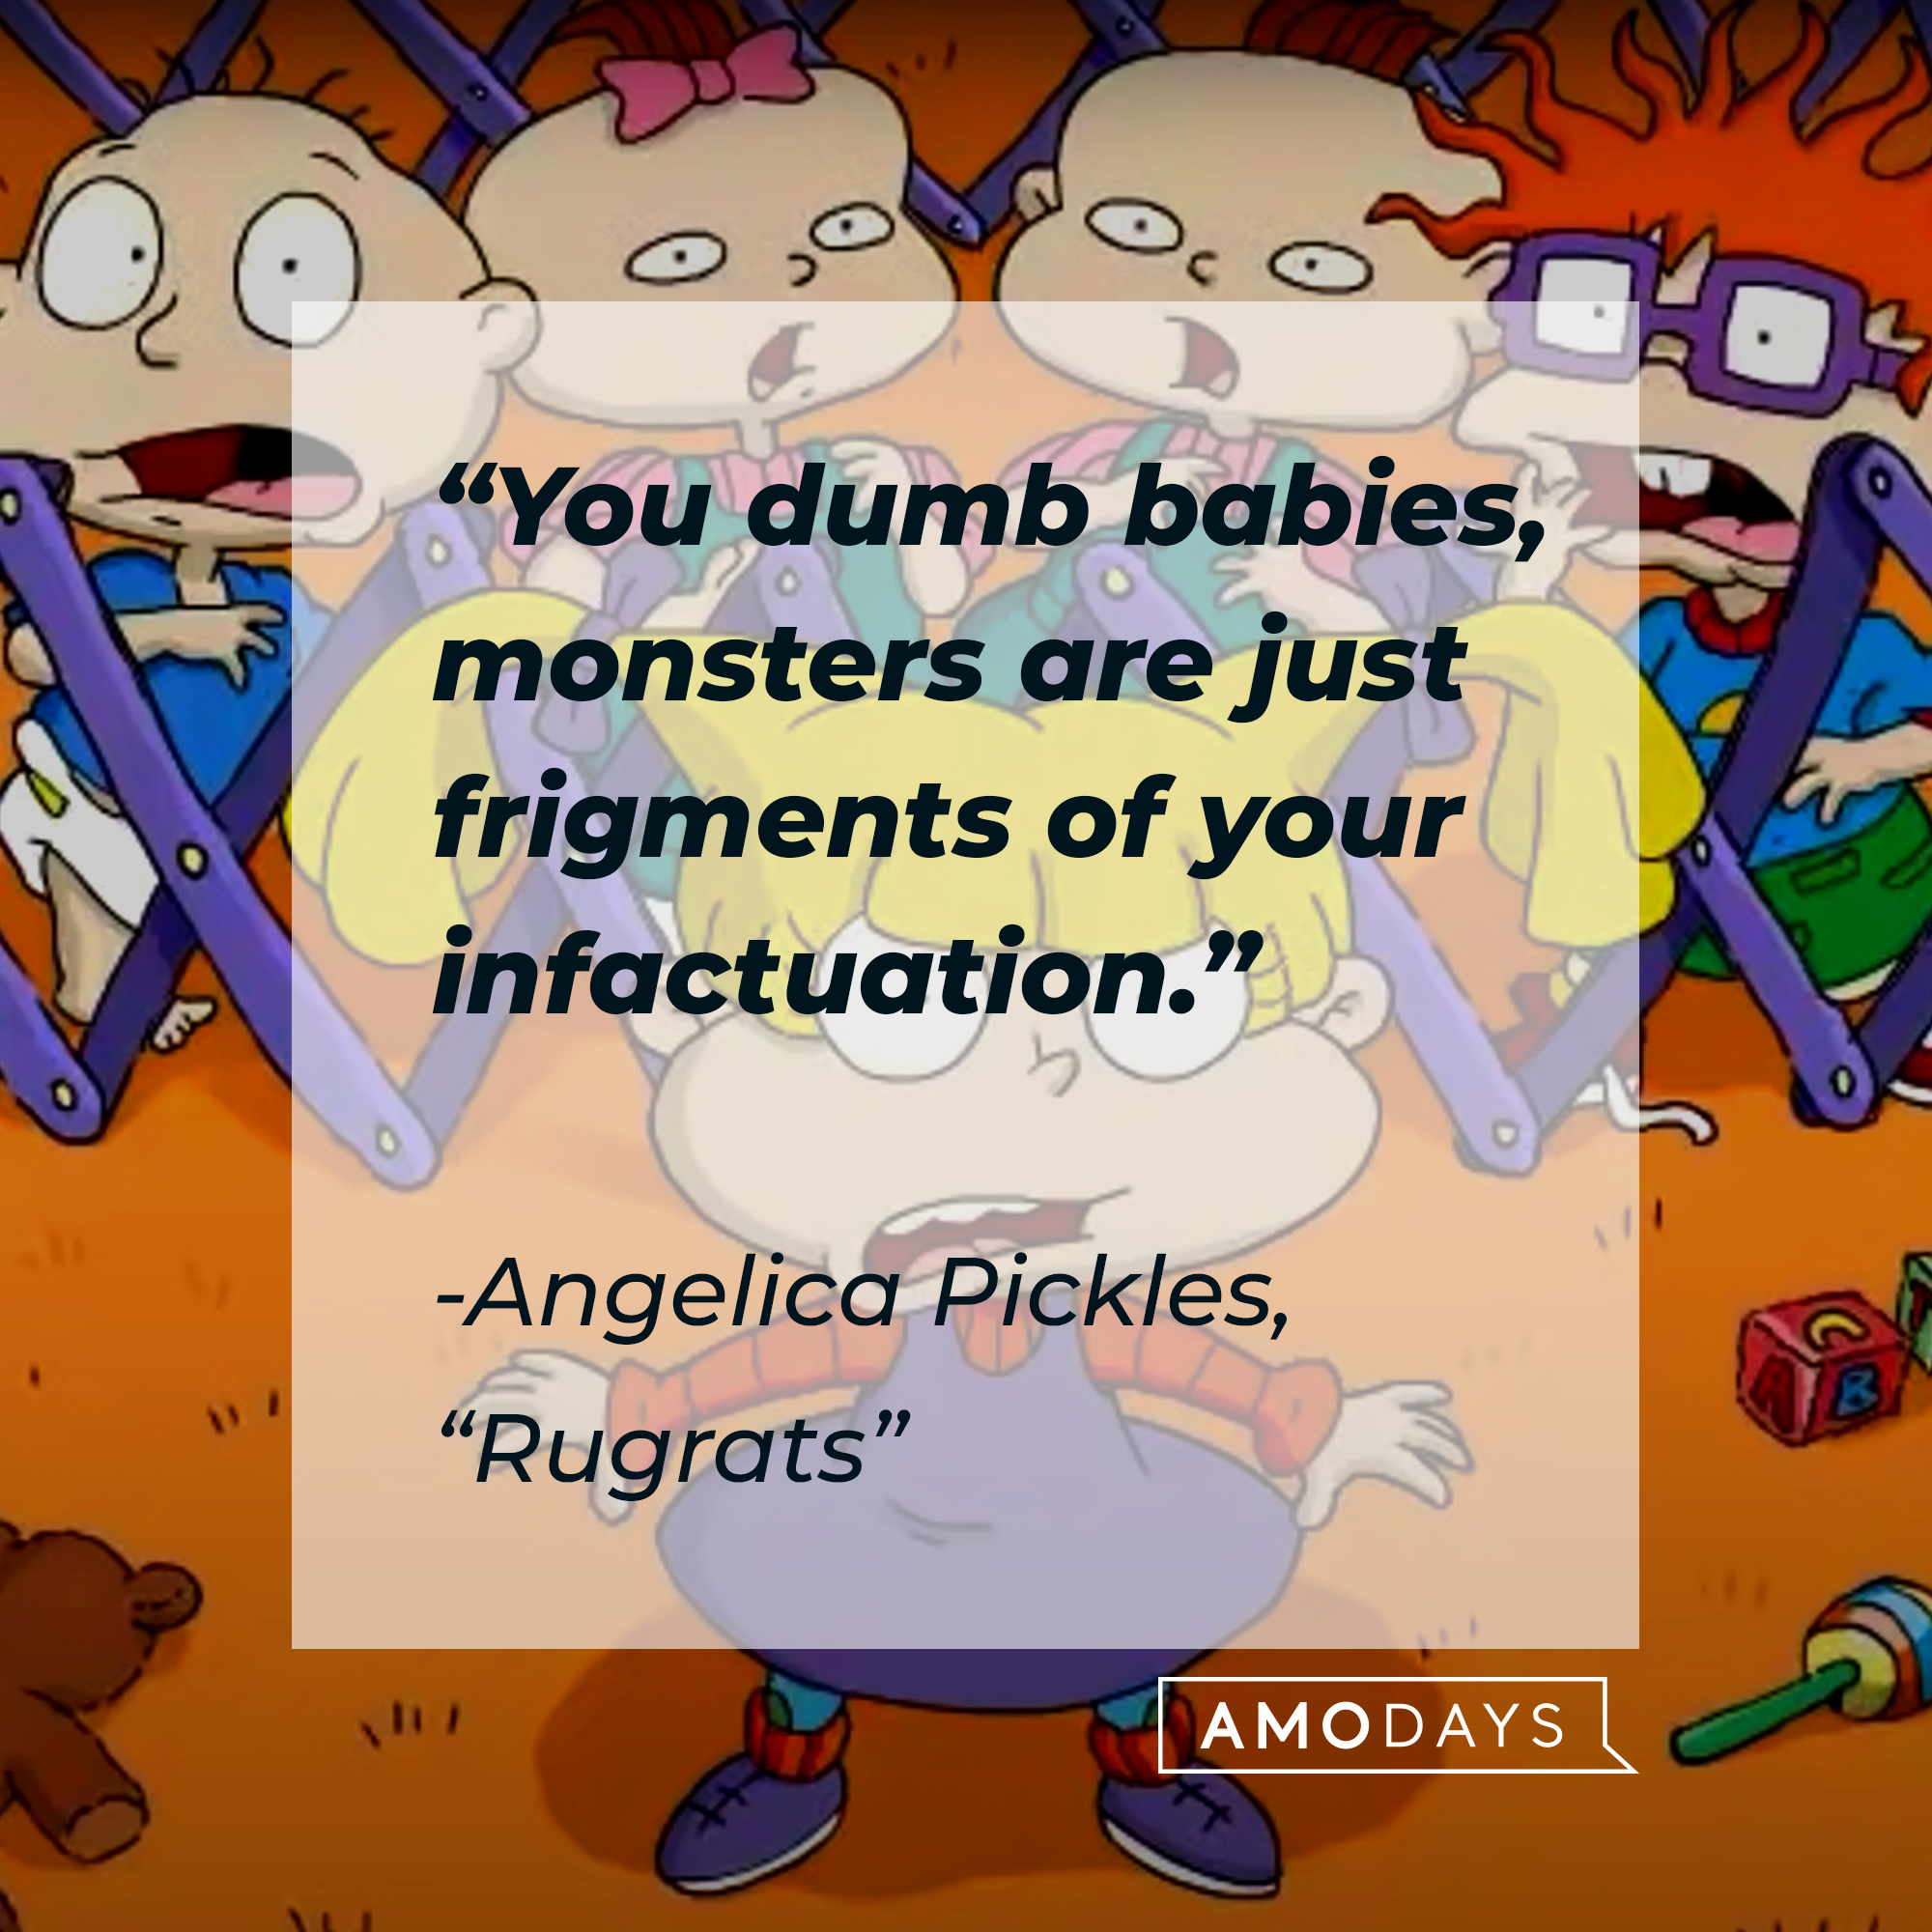 Angelica Pickles with her quote: “You dumb babies, monsters are just frigments of your infactuation.” | Source: Facebook.com/Rugrats